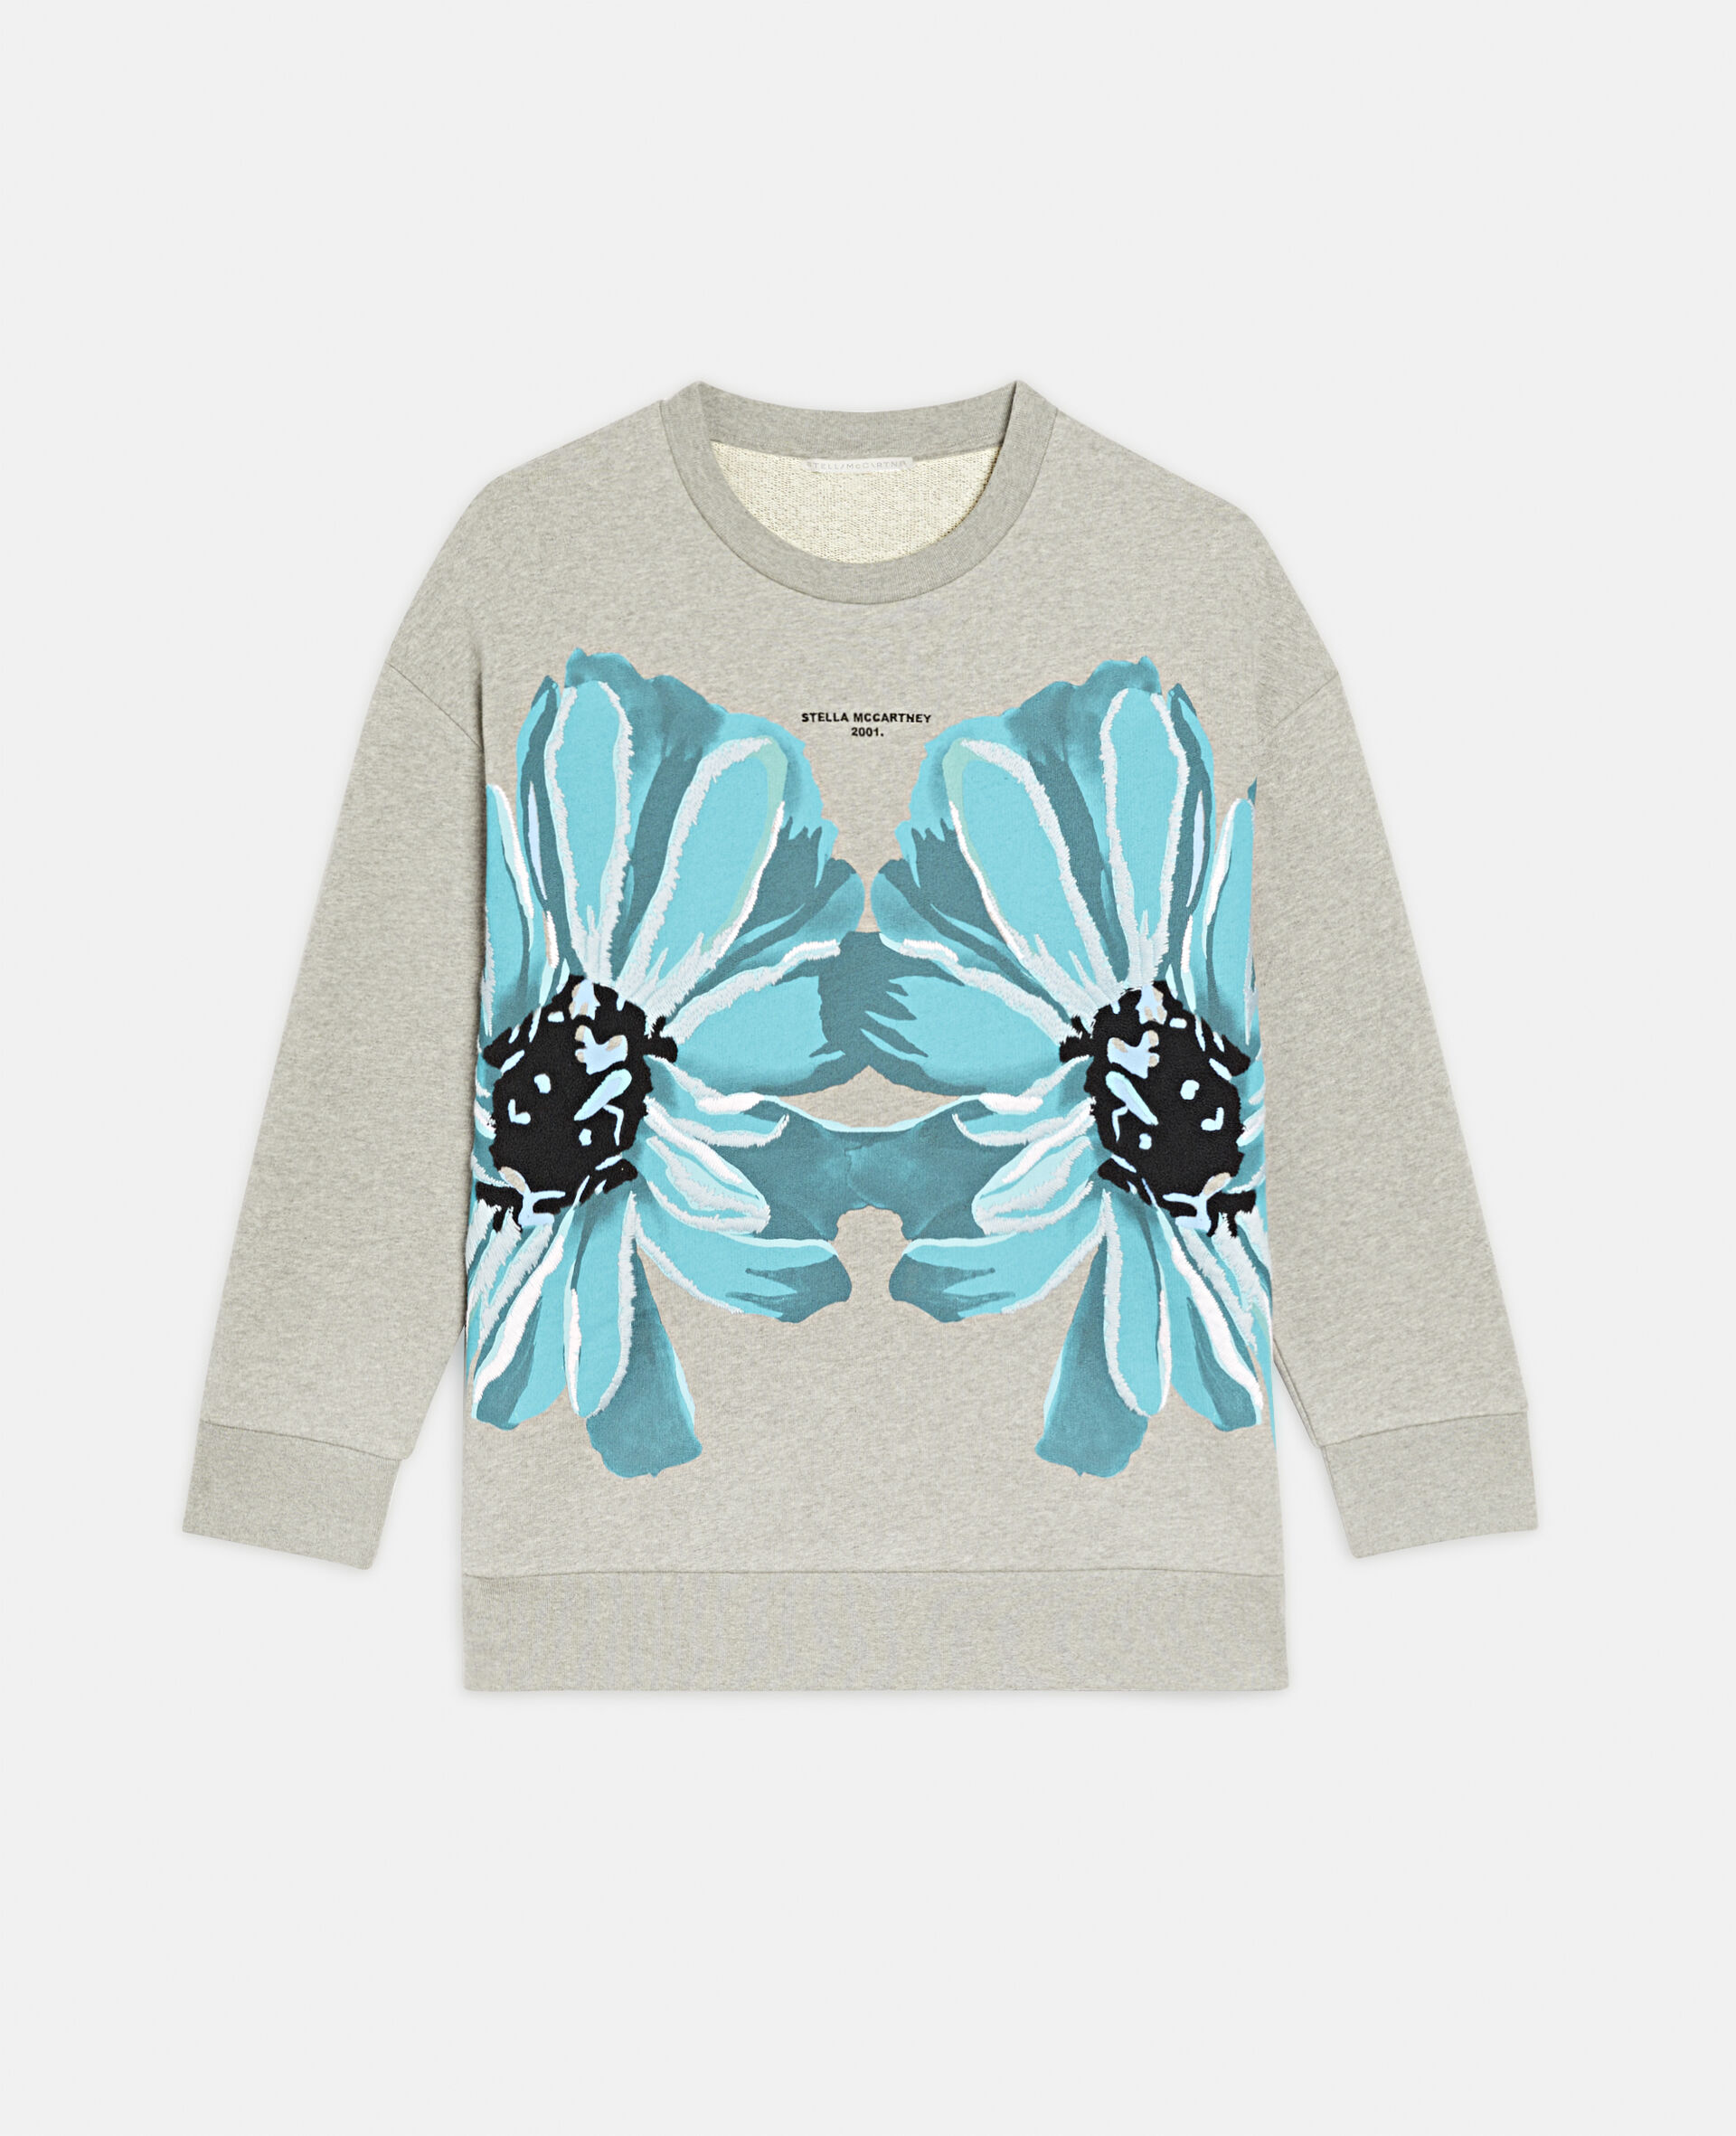 Floral Embroidered Sweatshirt-Grey-large